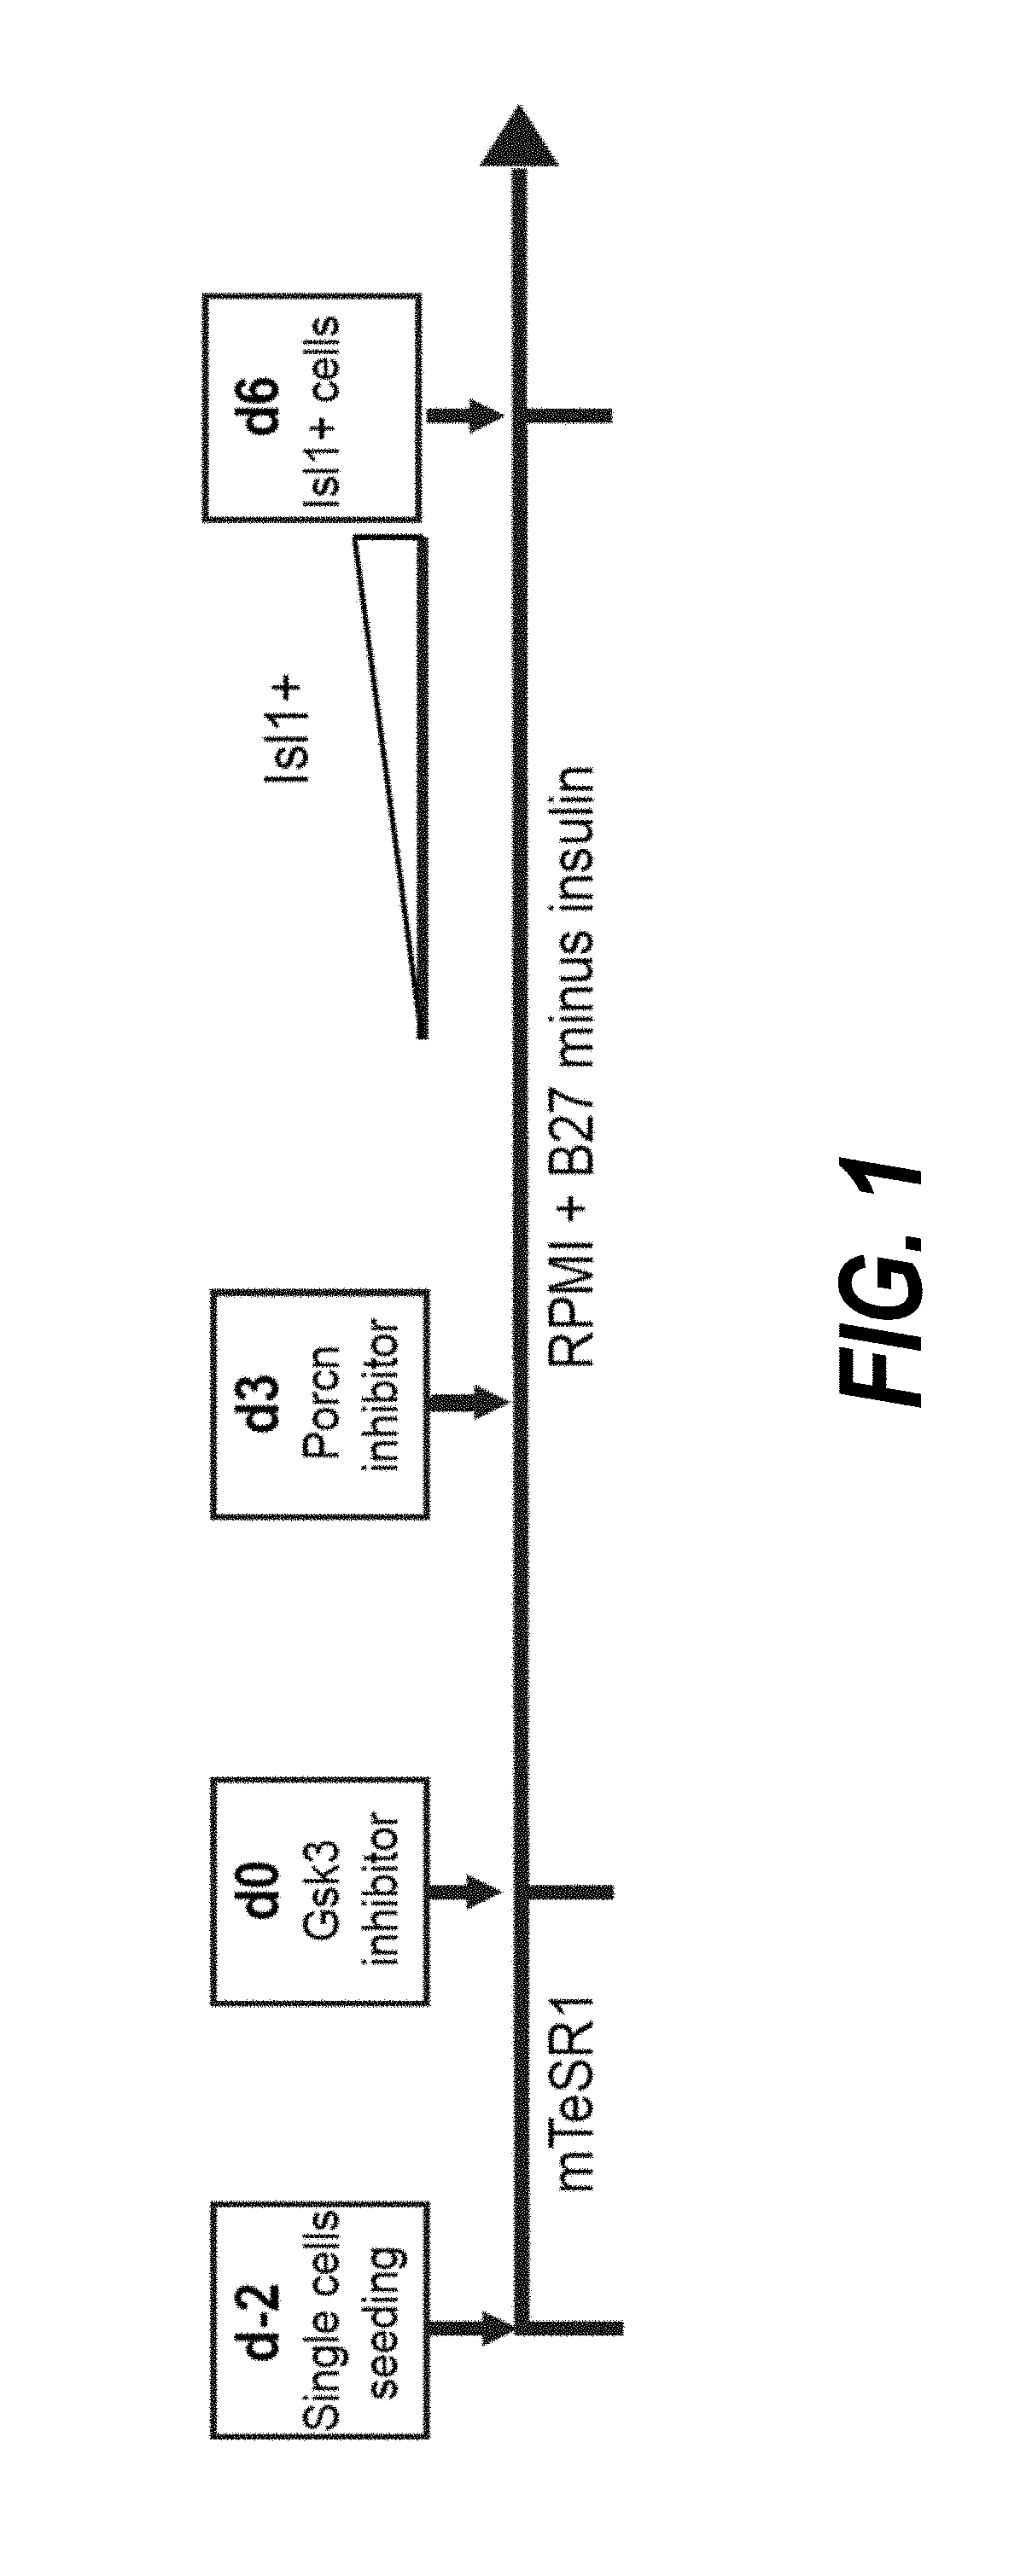 Methods for isolating human cardiac ventricular progenitor cells